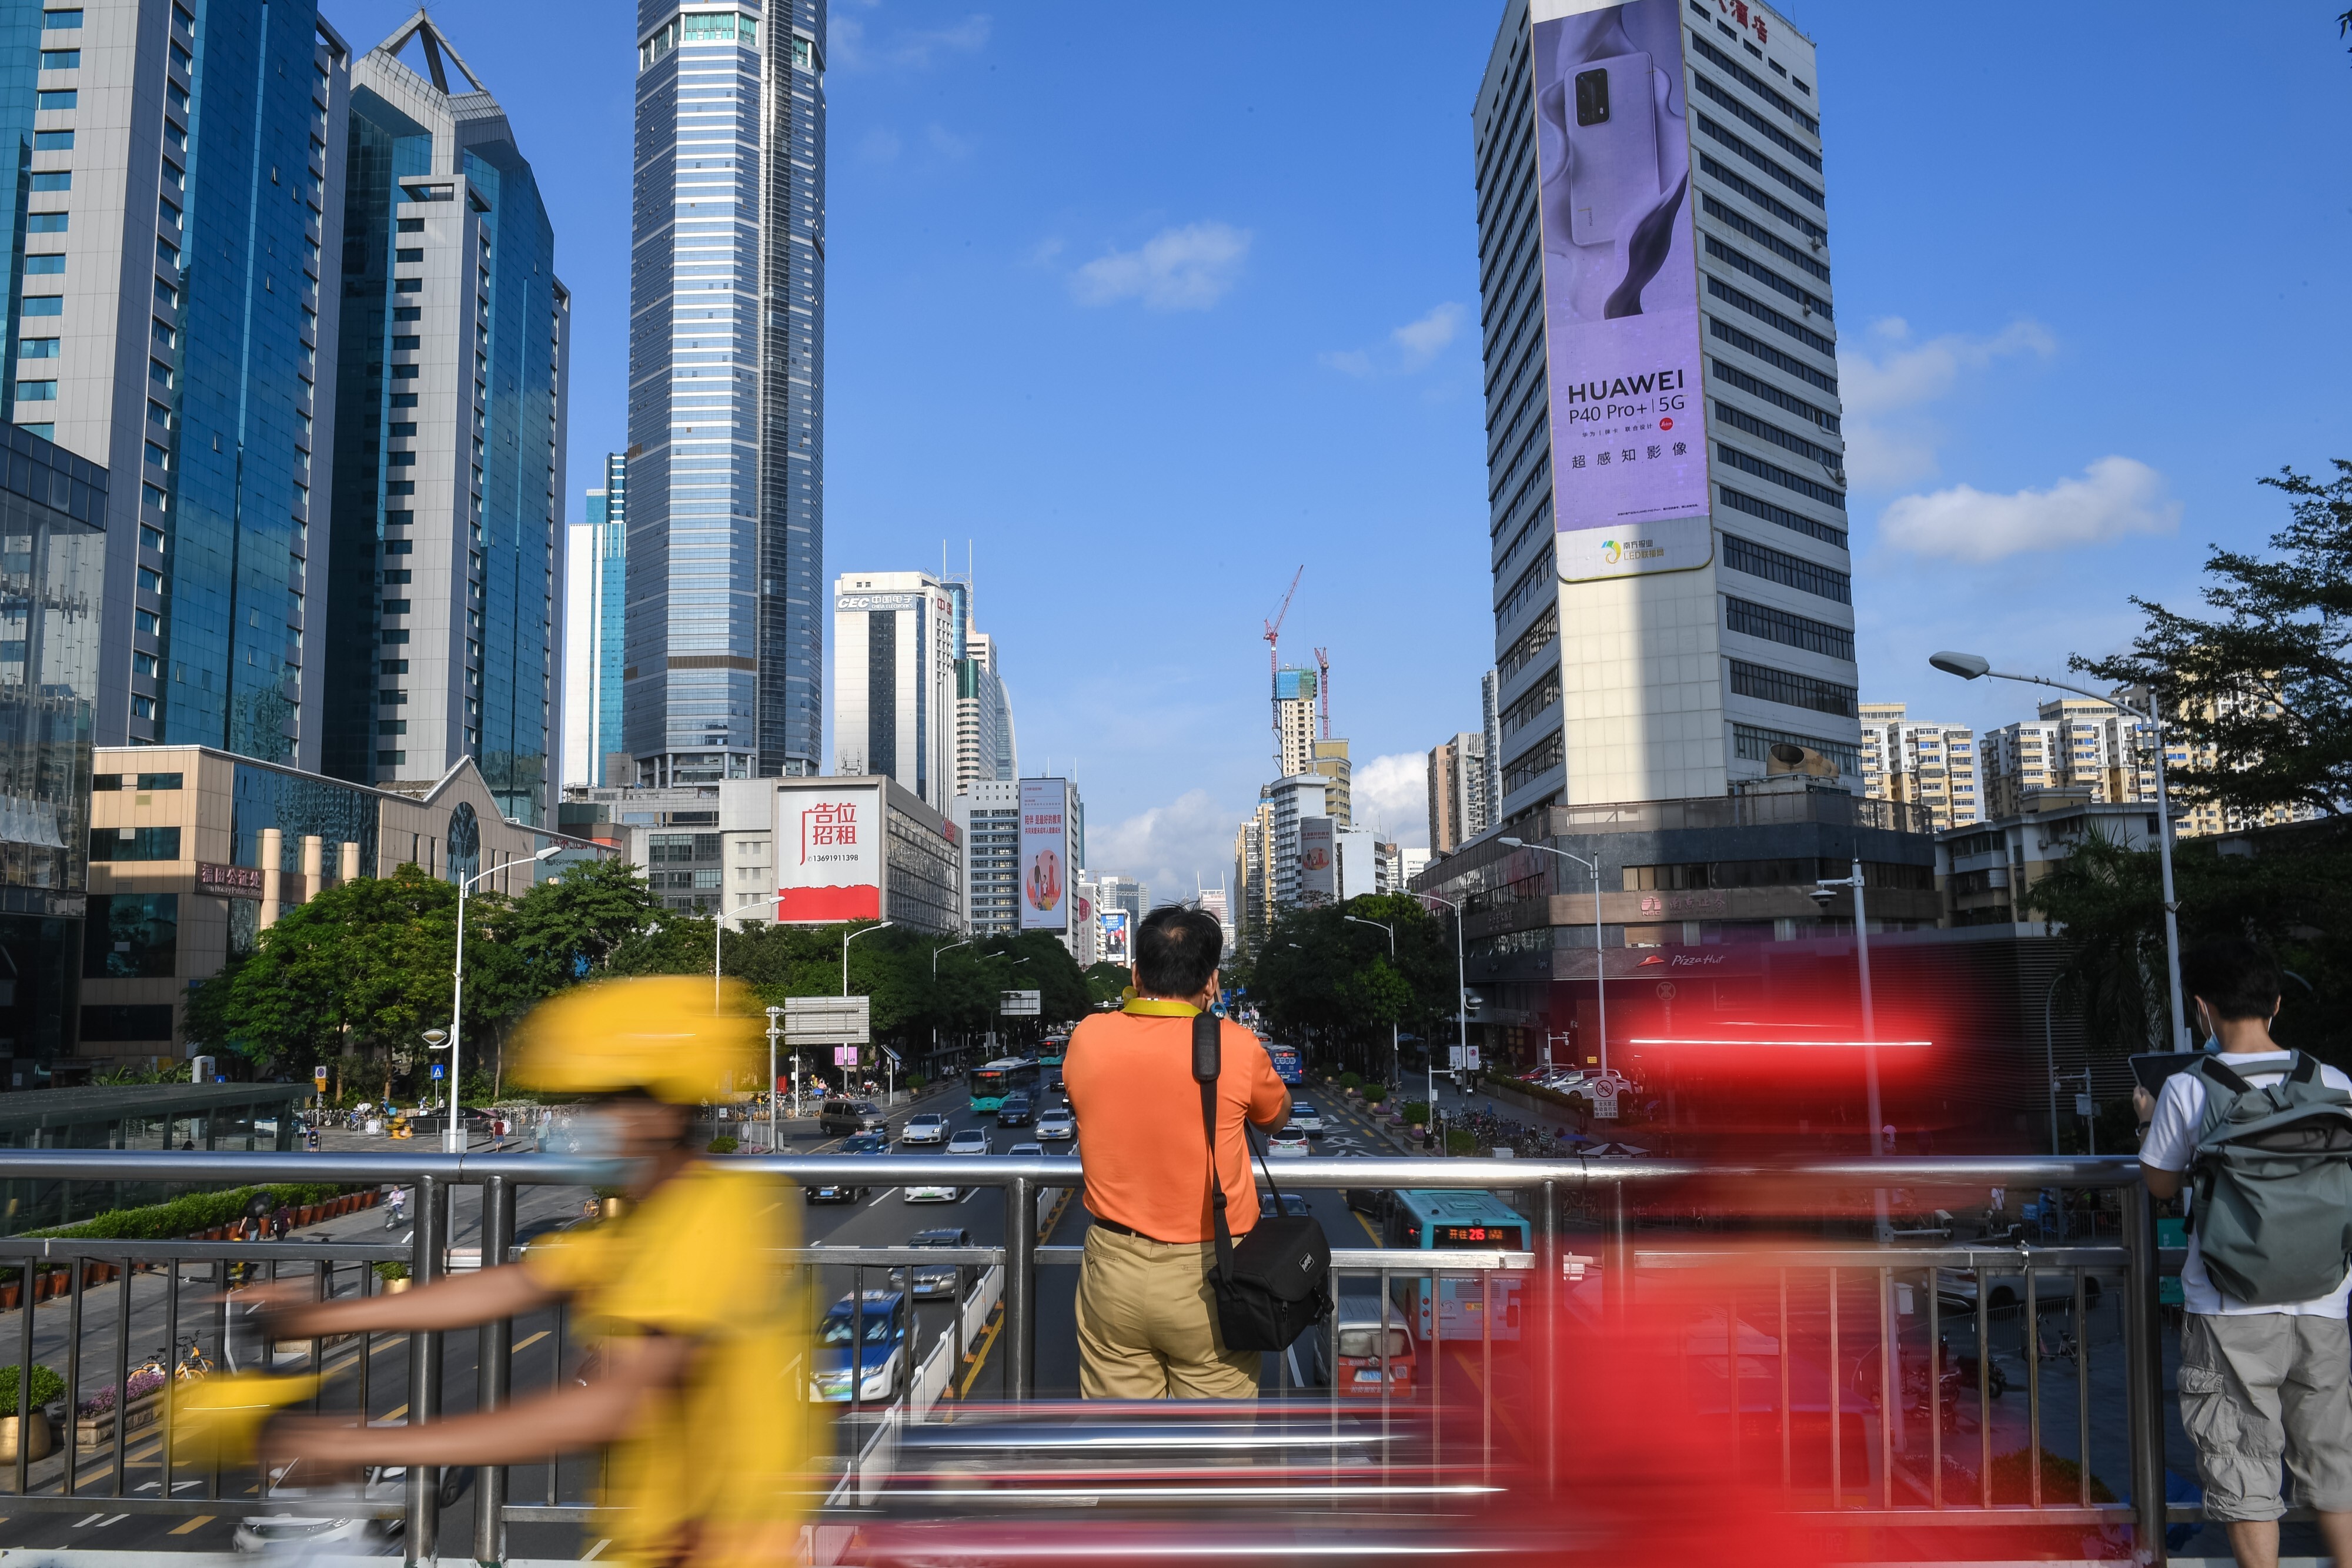 The government recently unveiled plans to turn Shenzhen into a ‘core engine’ of reform that it hopes will power growth and innovation. Photo: Xinhua